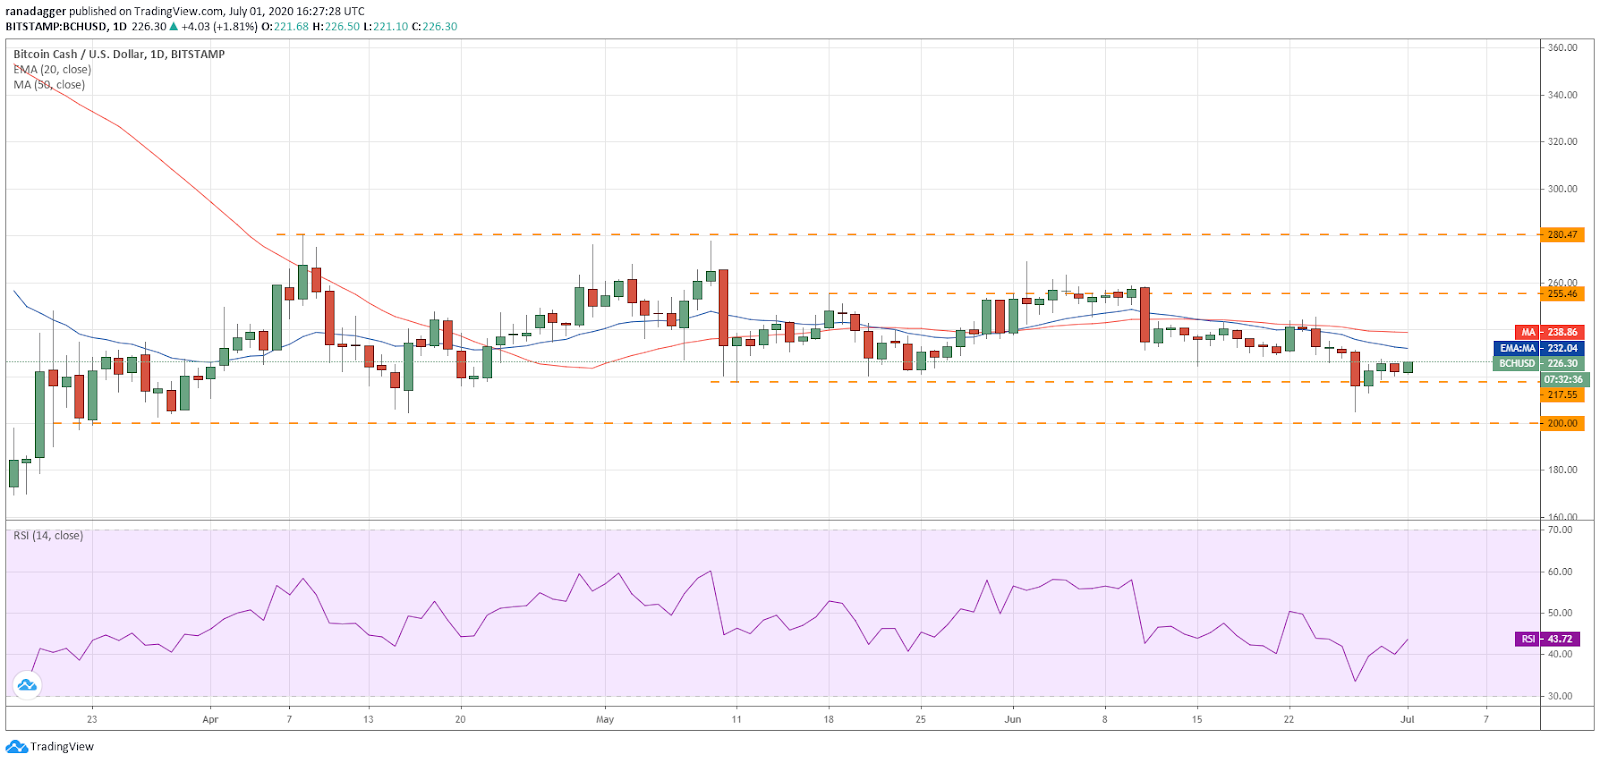 BCH/USD daily chart. Source: Tradingview​​​​​​​